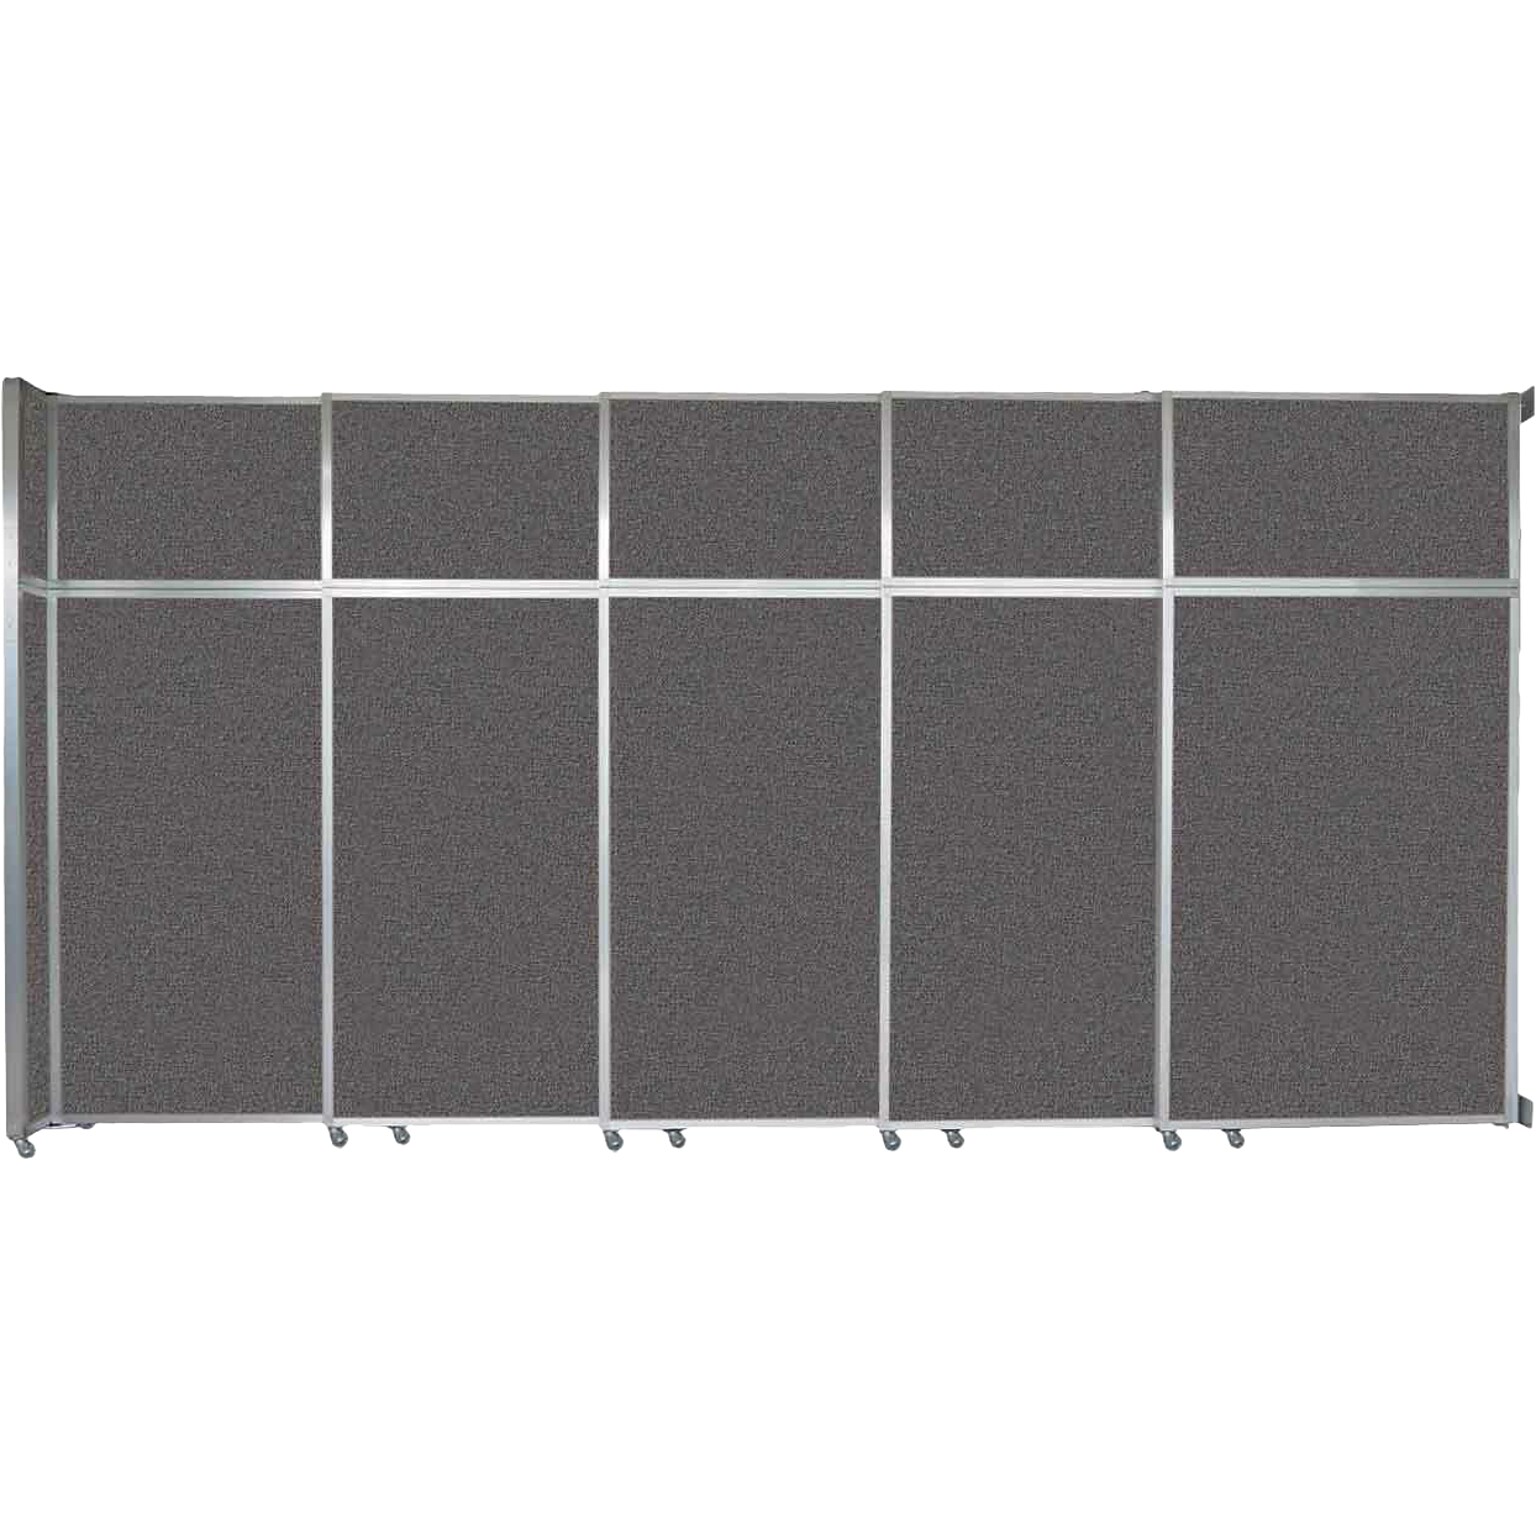 Versare Operable Wall Clamp Mount Sliding Room Divider, 101.25H x 187W, Charcoal Gray Fabric (1072507)